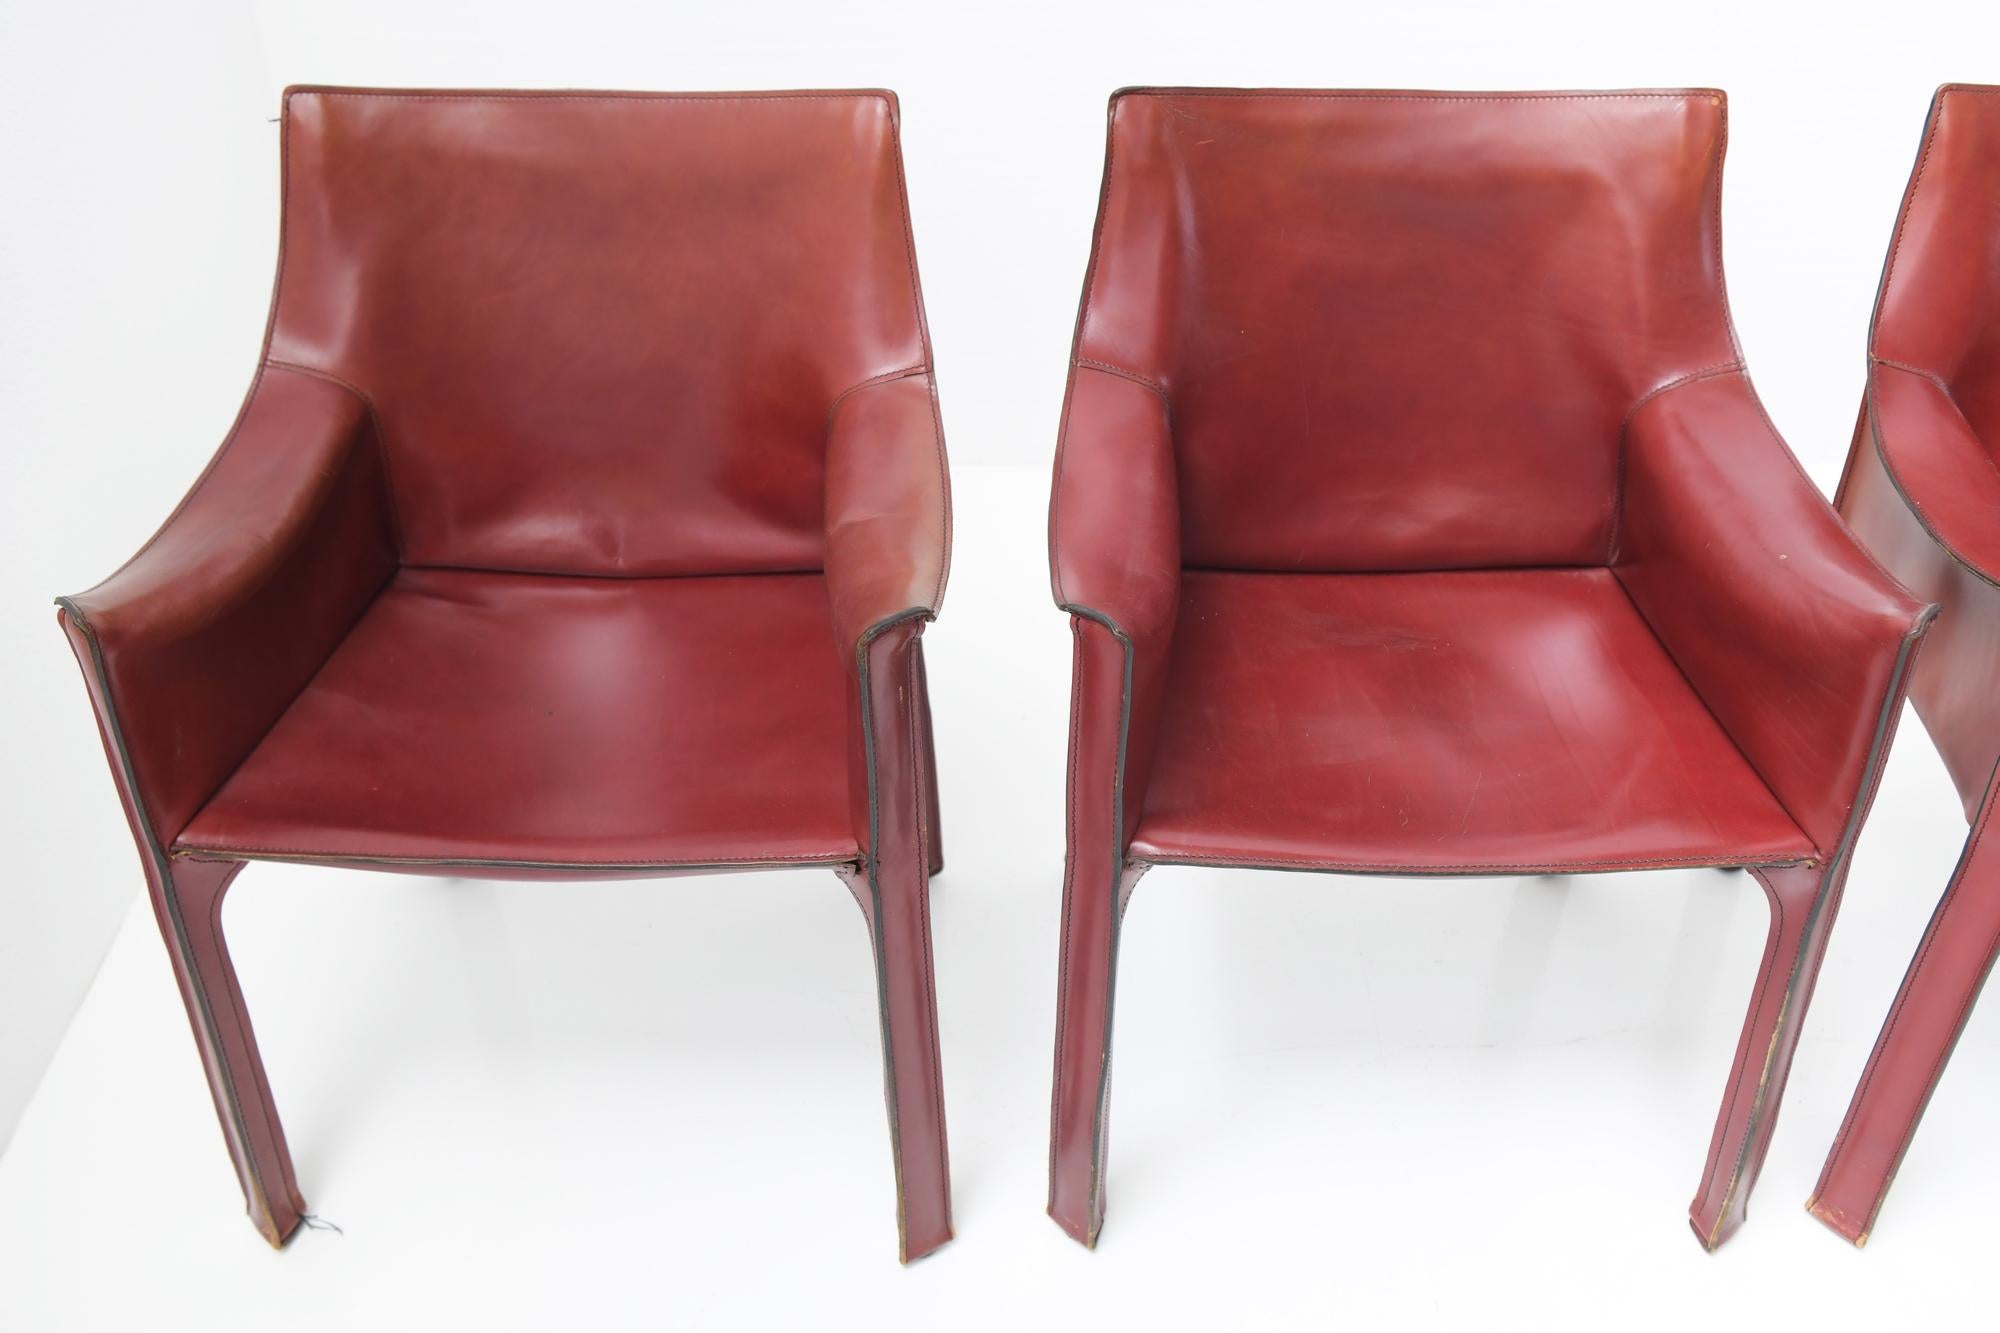 Leather CAB 413 Dining Chairs, Mario Bellini, Cassina